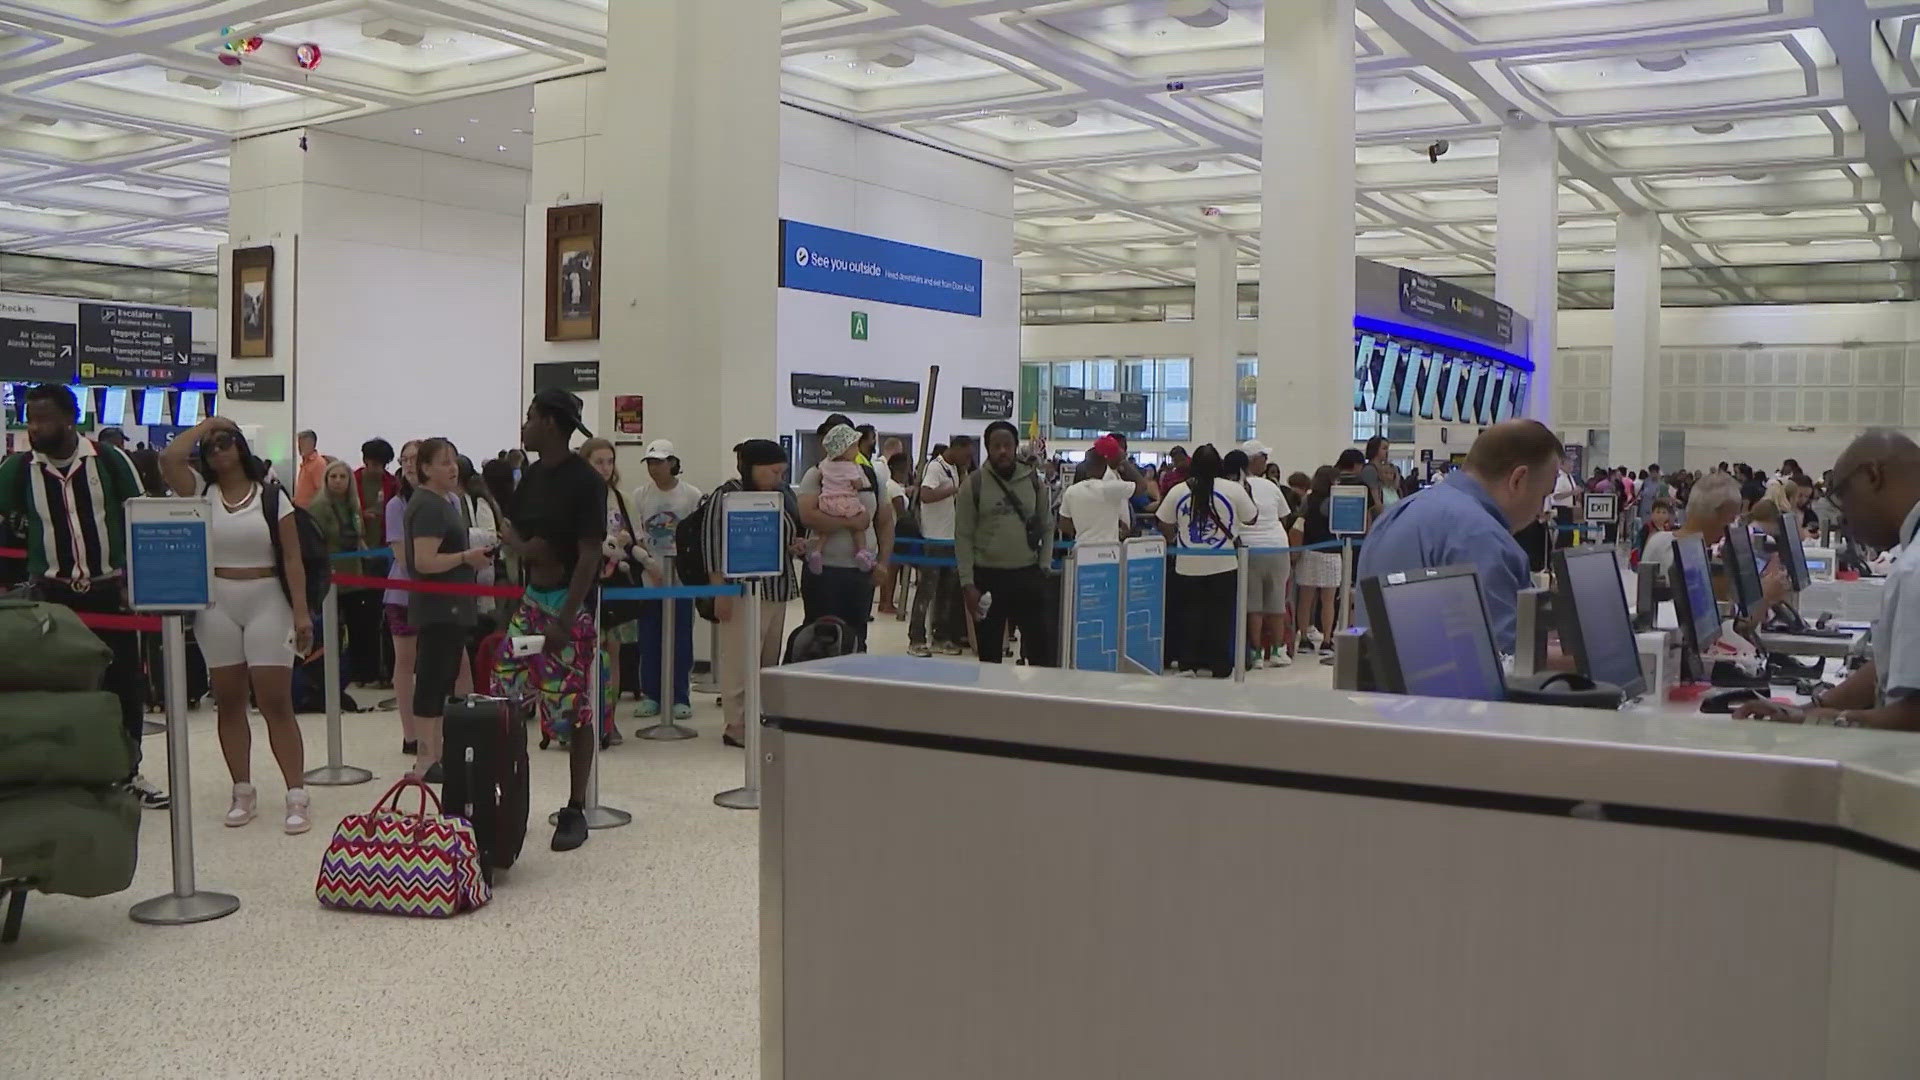 Nearly 2 million people are set to go through Bush and Hobby Airports for a July 4 travel surge that will shatter previous records for holiday traffic.